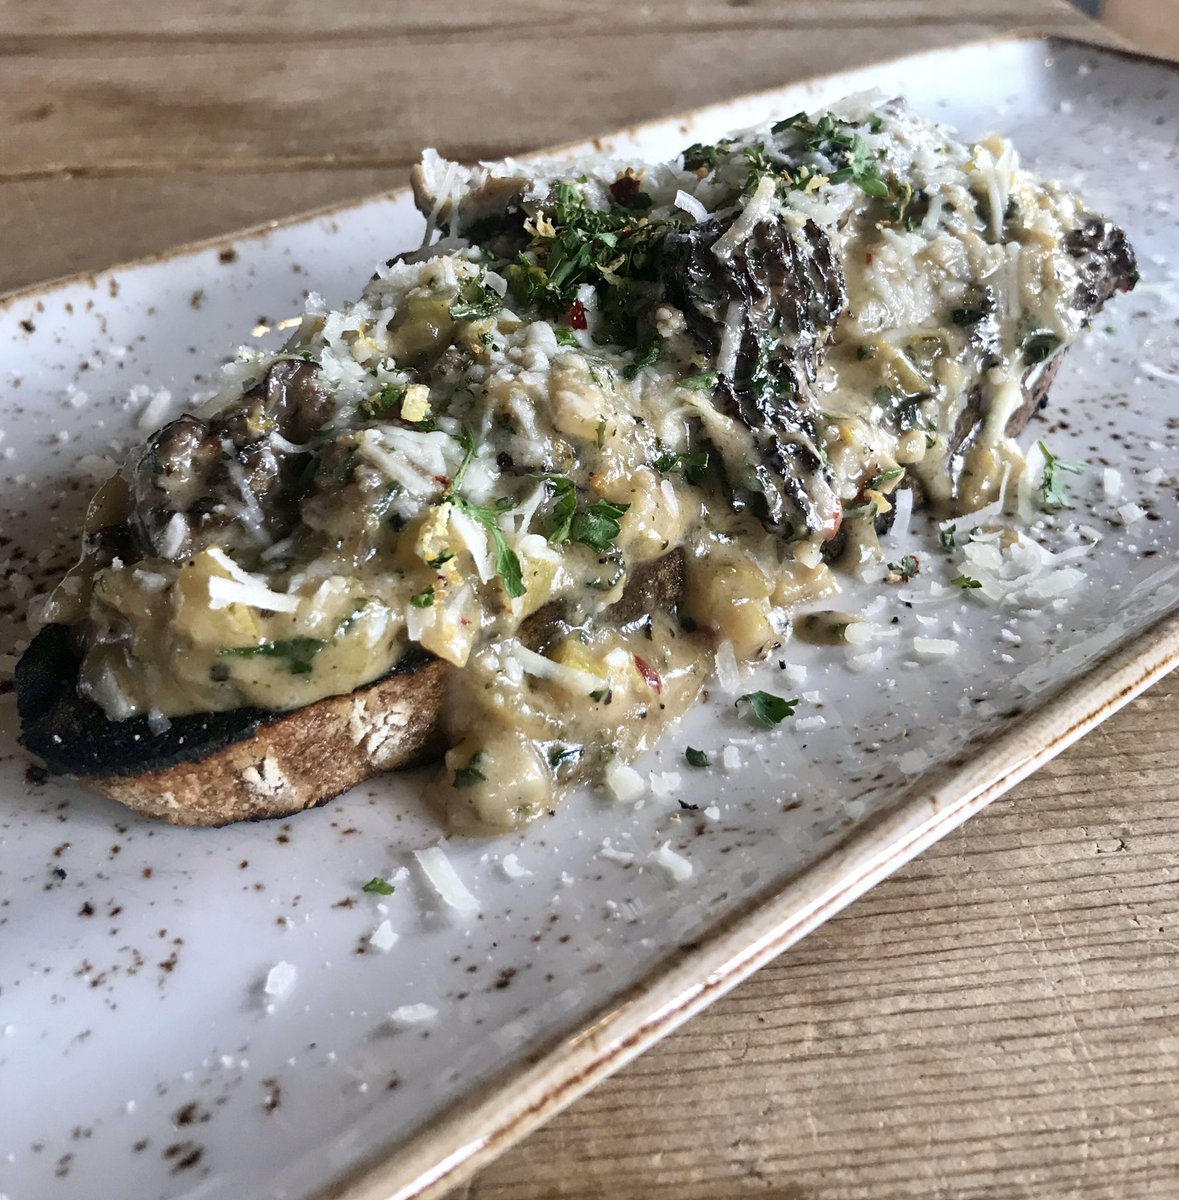 Start your Dinner off tonight with our Morels & Toast Appetizer. Hand foraged Oregon morel mushrooms are sautéd and served over charred house made  sourdough and topped with Pecorino. #94thStreet #LiquidAssets #OCMD #Morels #FancyToast